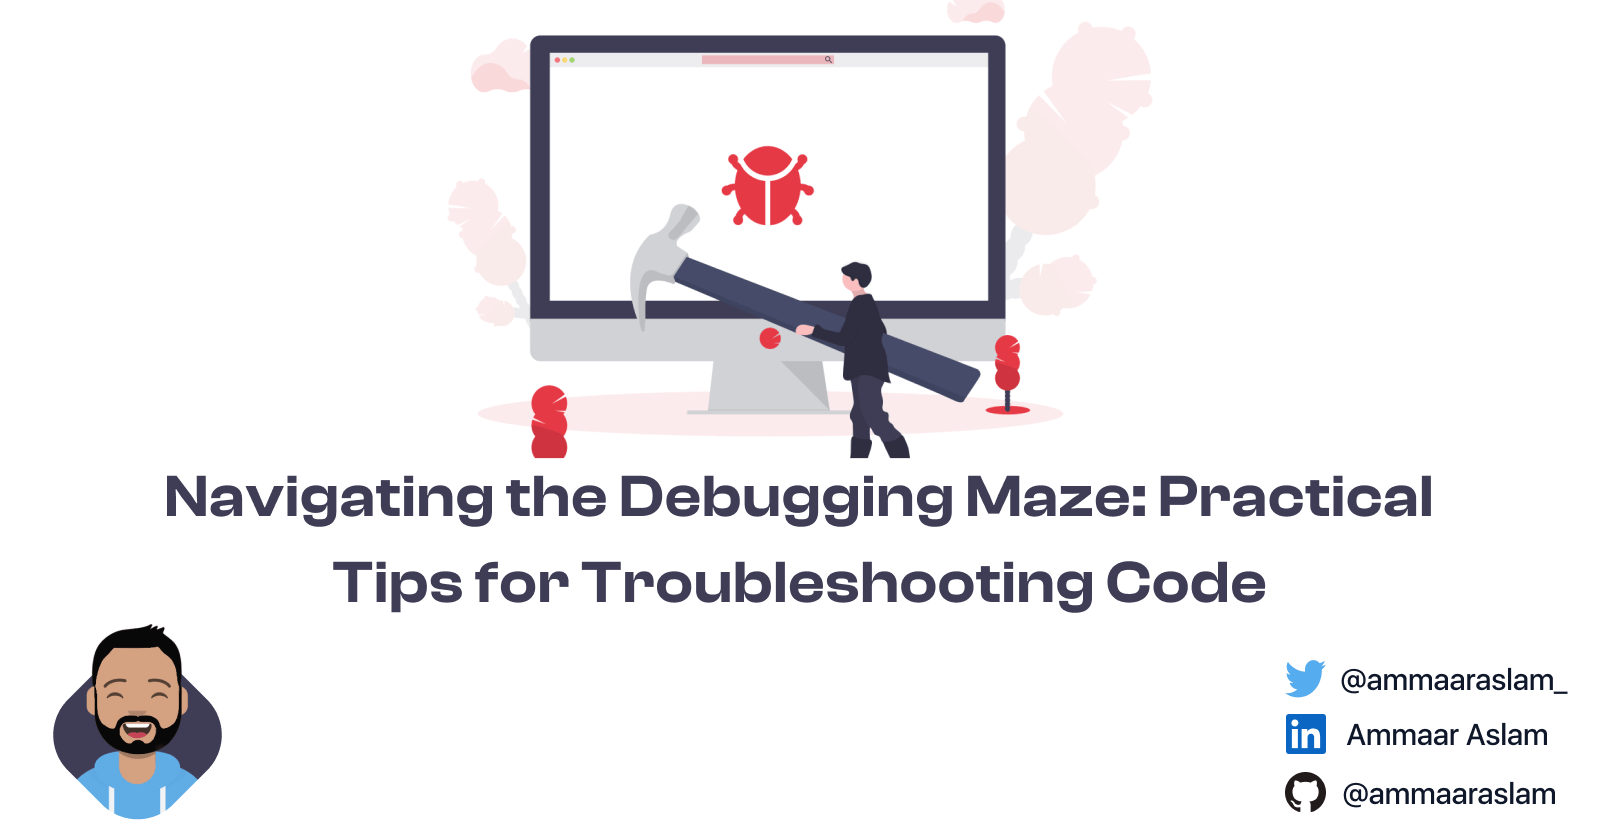 Navigating the Debugging Maze: Practical Tips for Troubleshooting Code